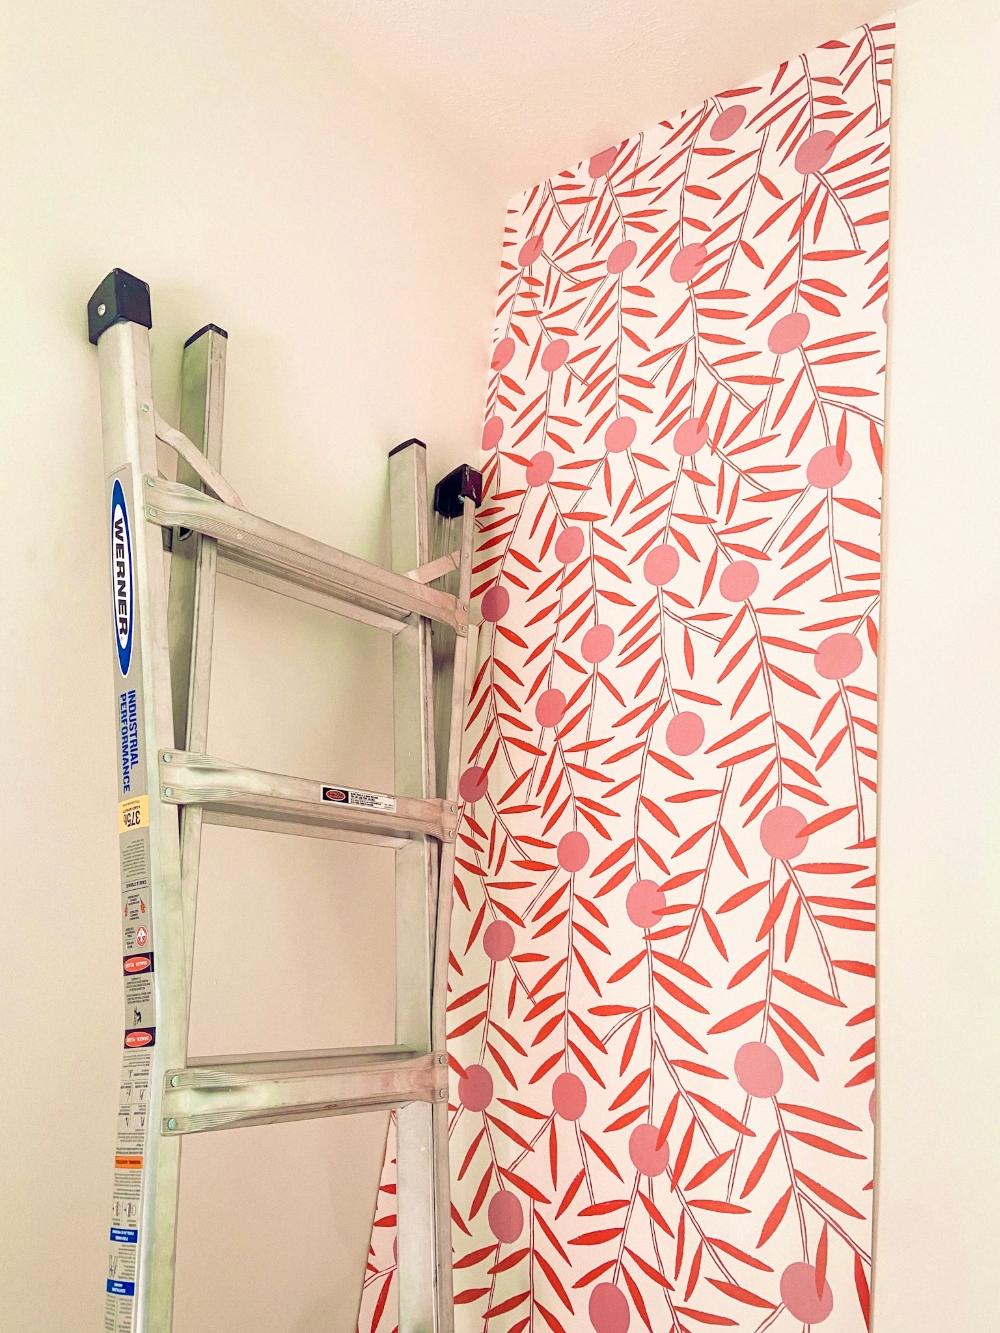 How to Hang Peel and Stick Wallpaper. Peel and stick wallpaper can transform a wall in no time and to make it easier, I am sharing my favorite tips and tricks to make it easy for you to do!